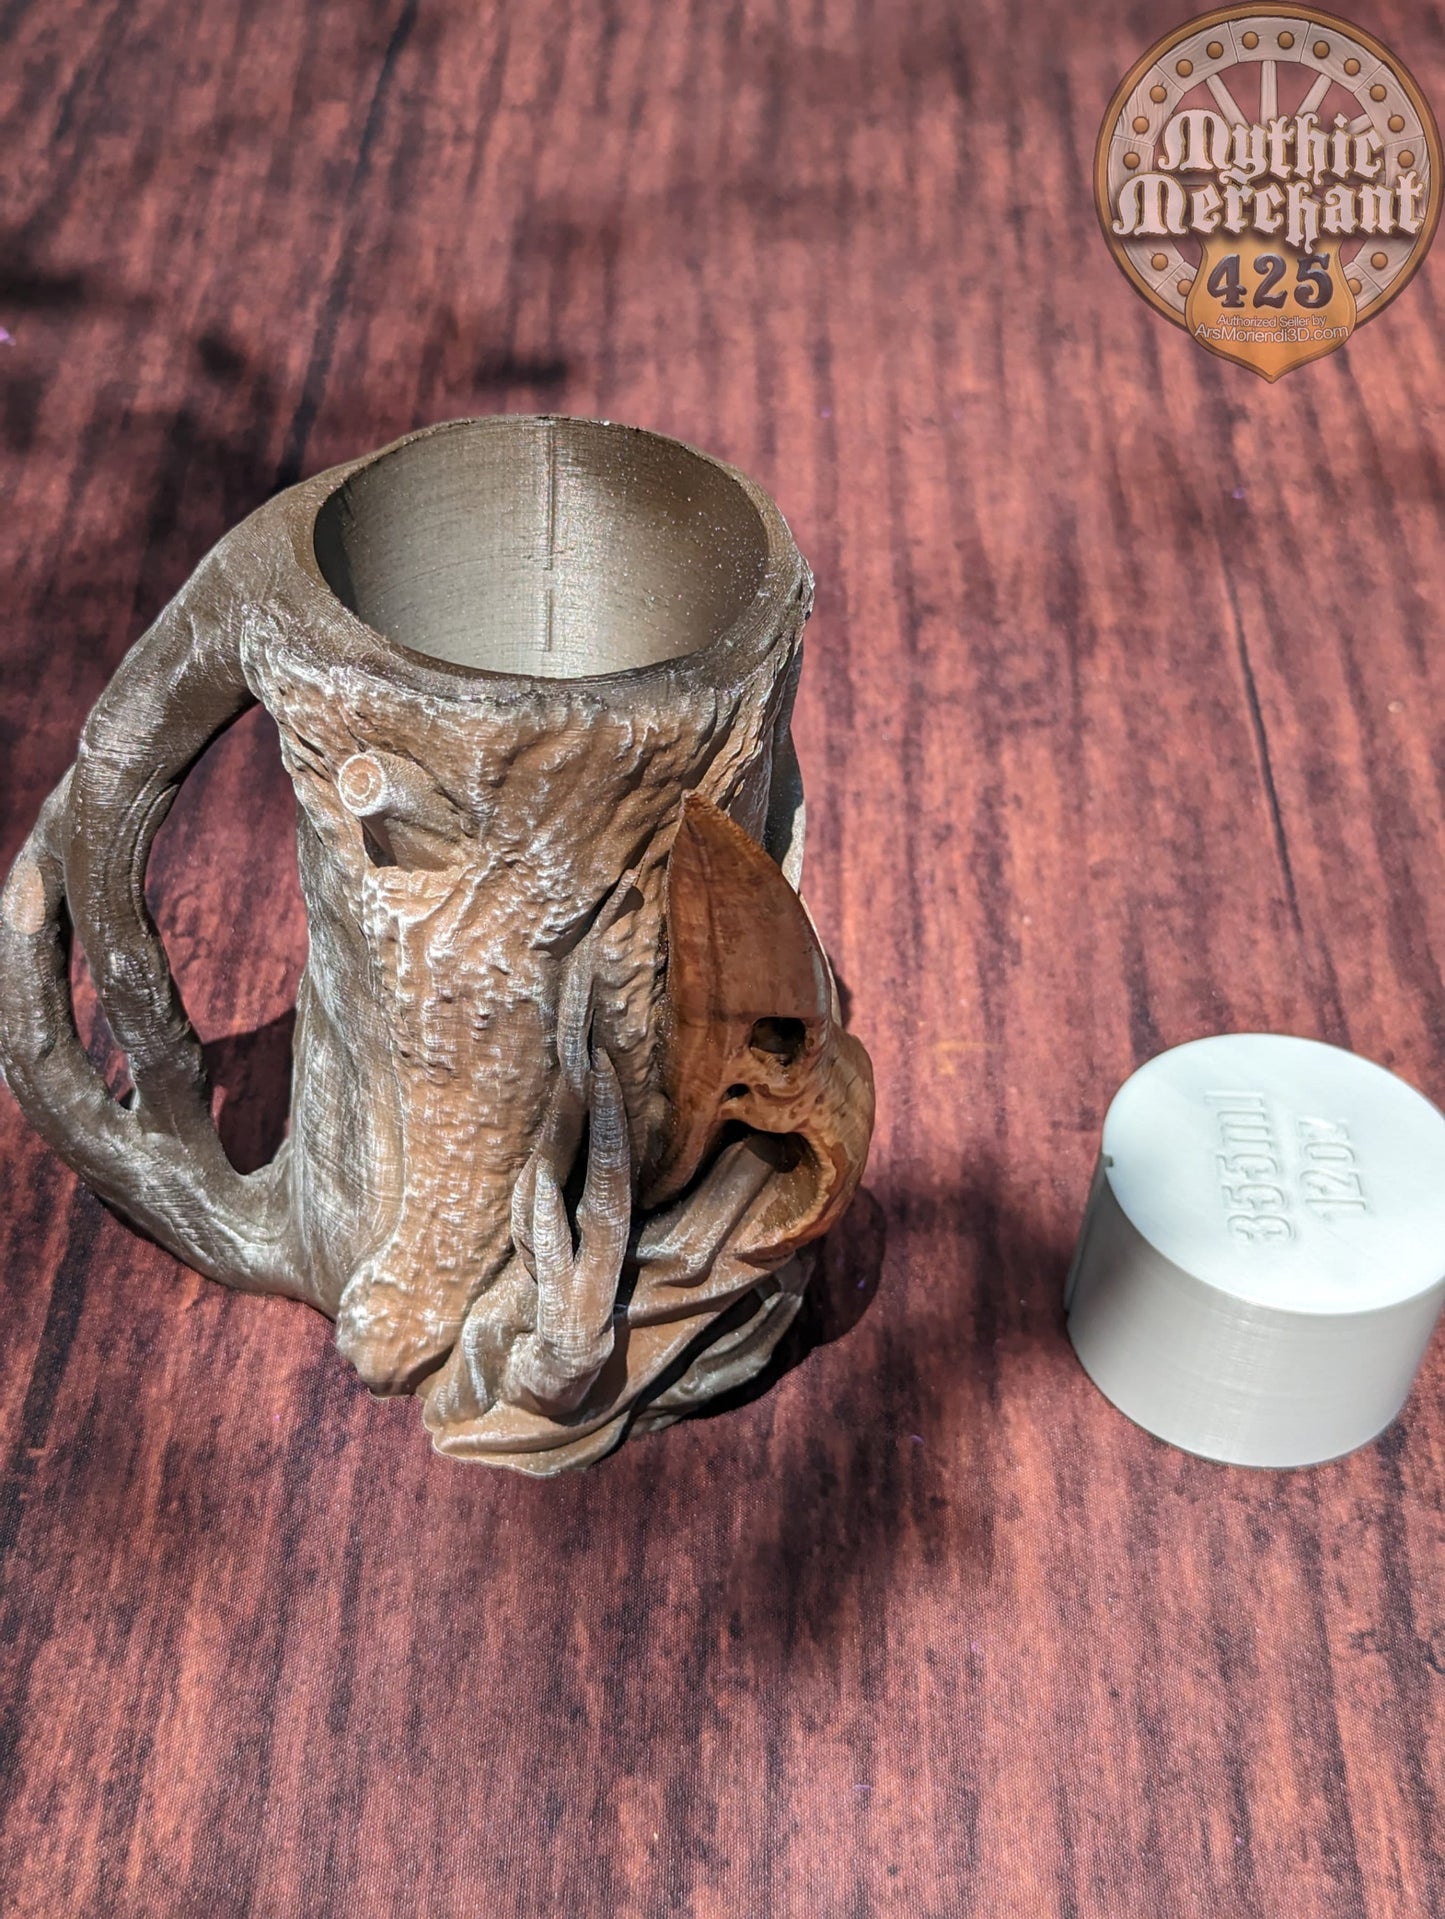 Druid Class 3D Printed Mythic Mug Stein Dice Vault | Tabletop RPG Gaming Cosplay - Dungeons and Dragon DnD D&D Wargaming | Drink Koozie